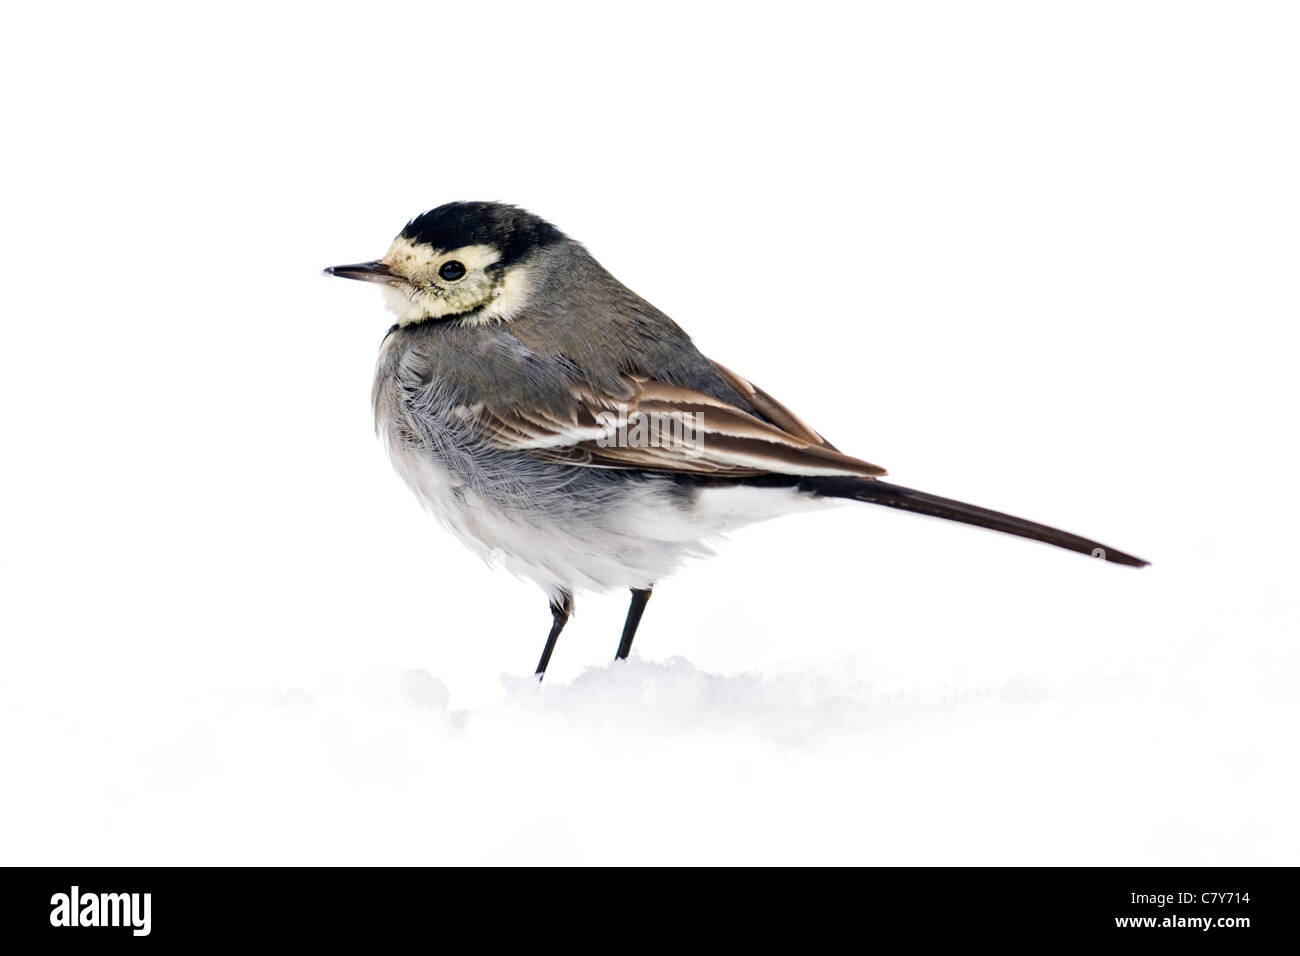 Pied Wagtail standing in snow Stock Photo